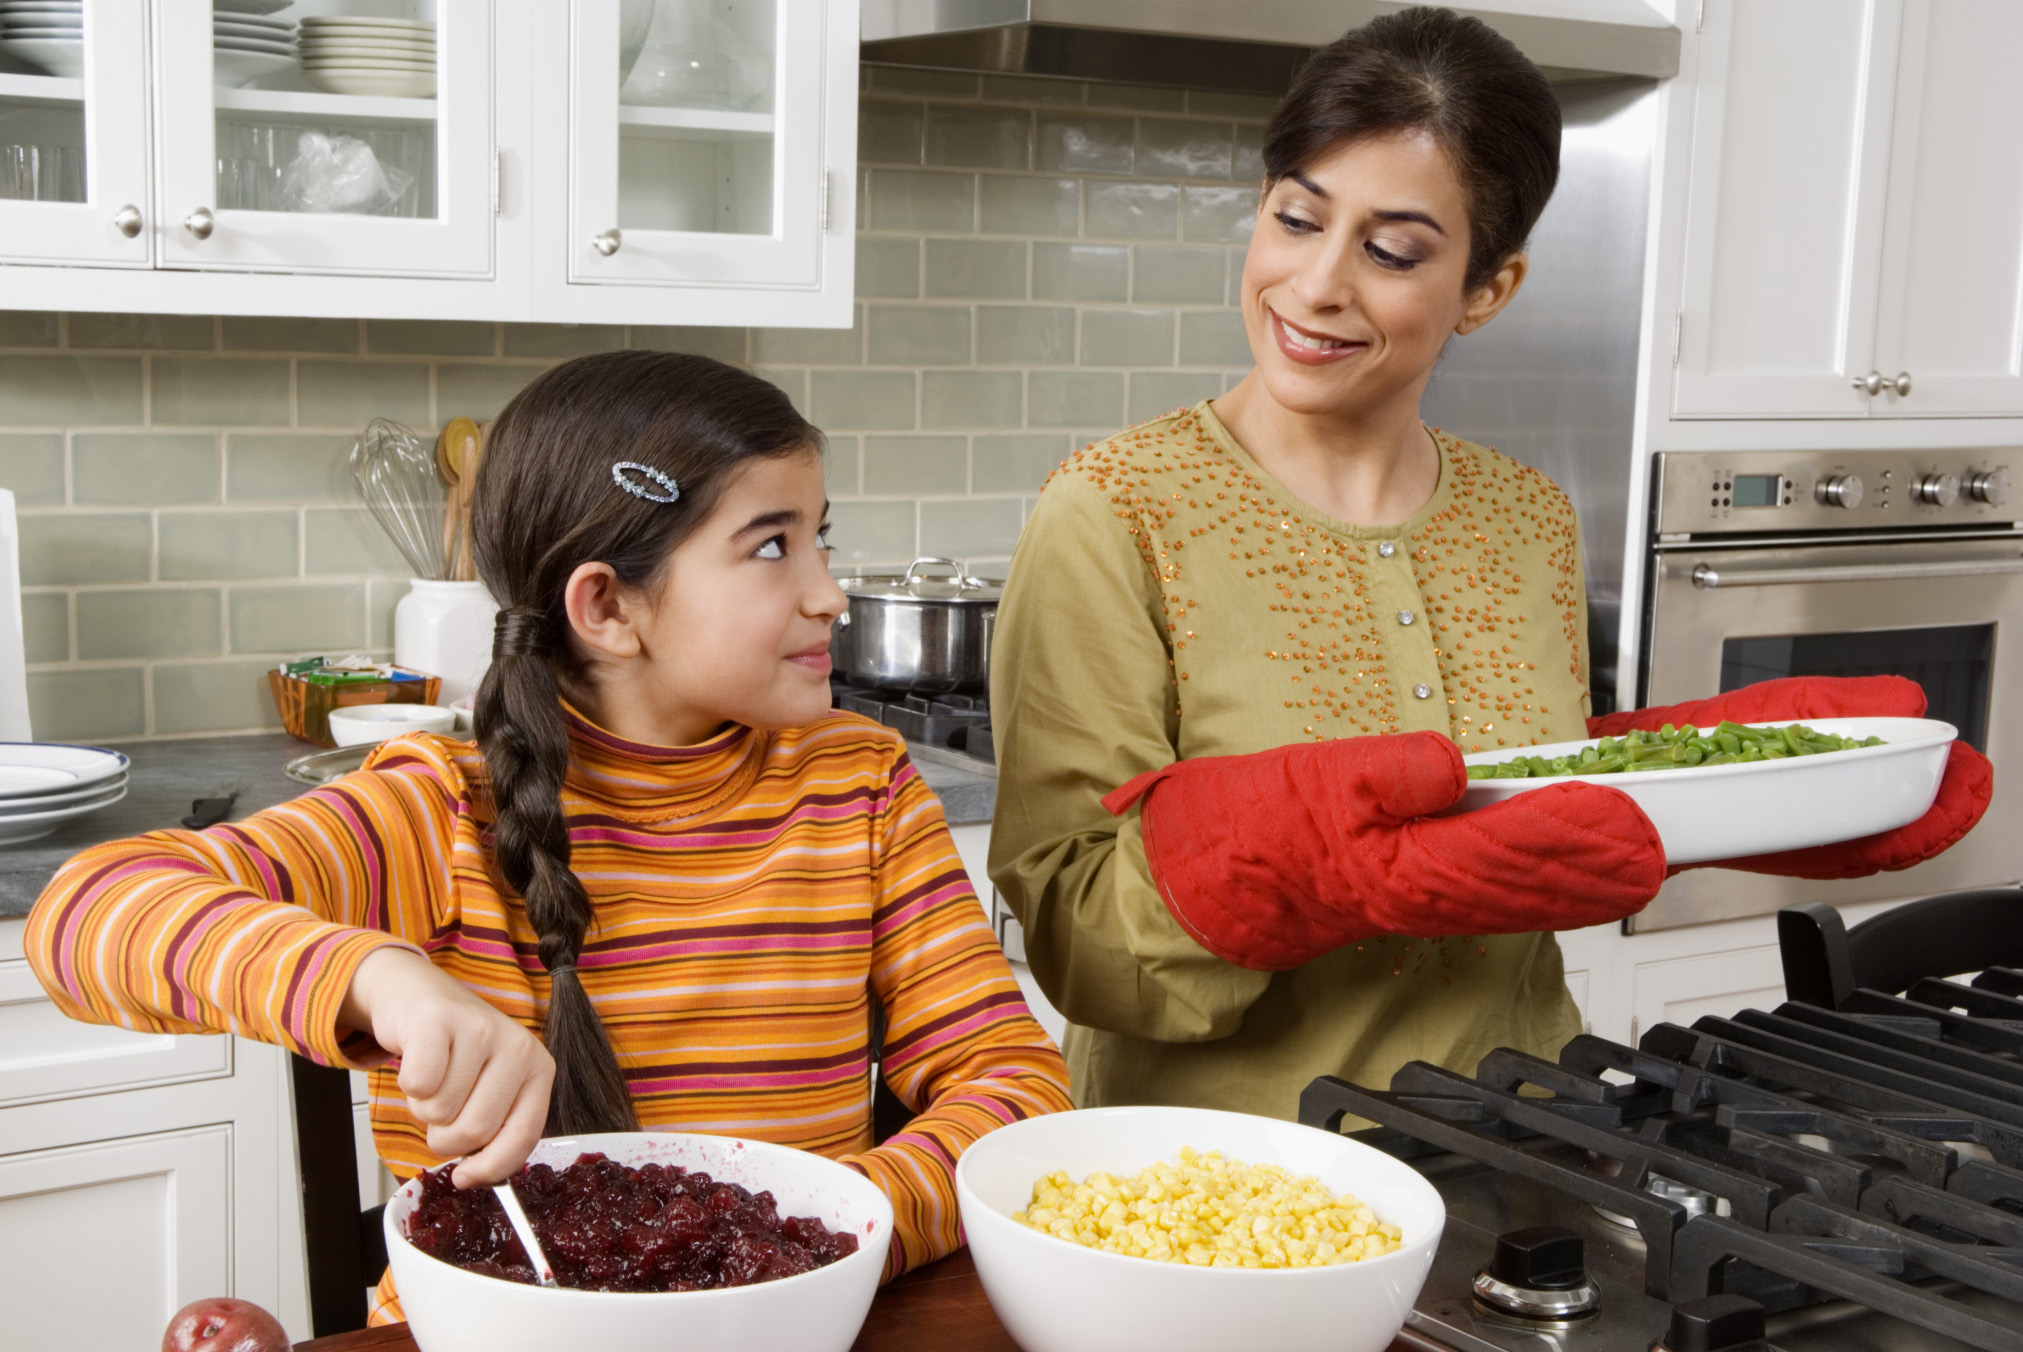 Woman-cooking-with-daughter-holding-pan-with-oven-mitts-crop-ThinkstockPhotos-76766403-Creatas Images